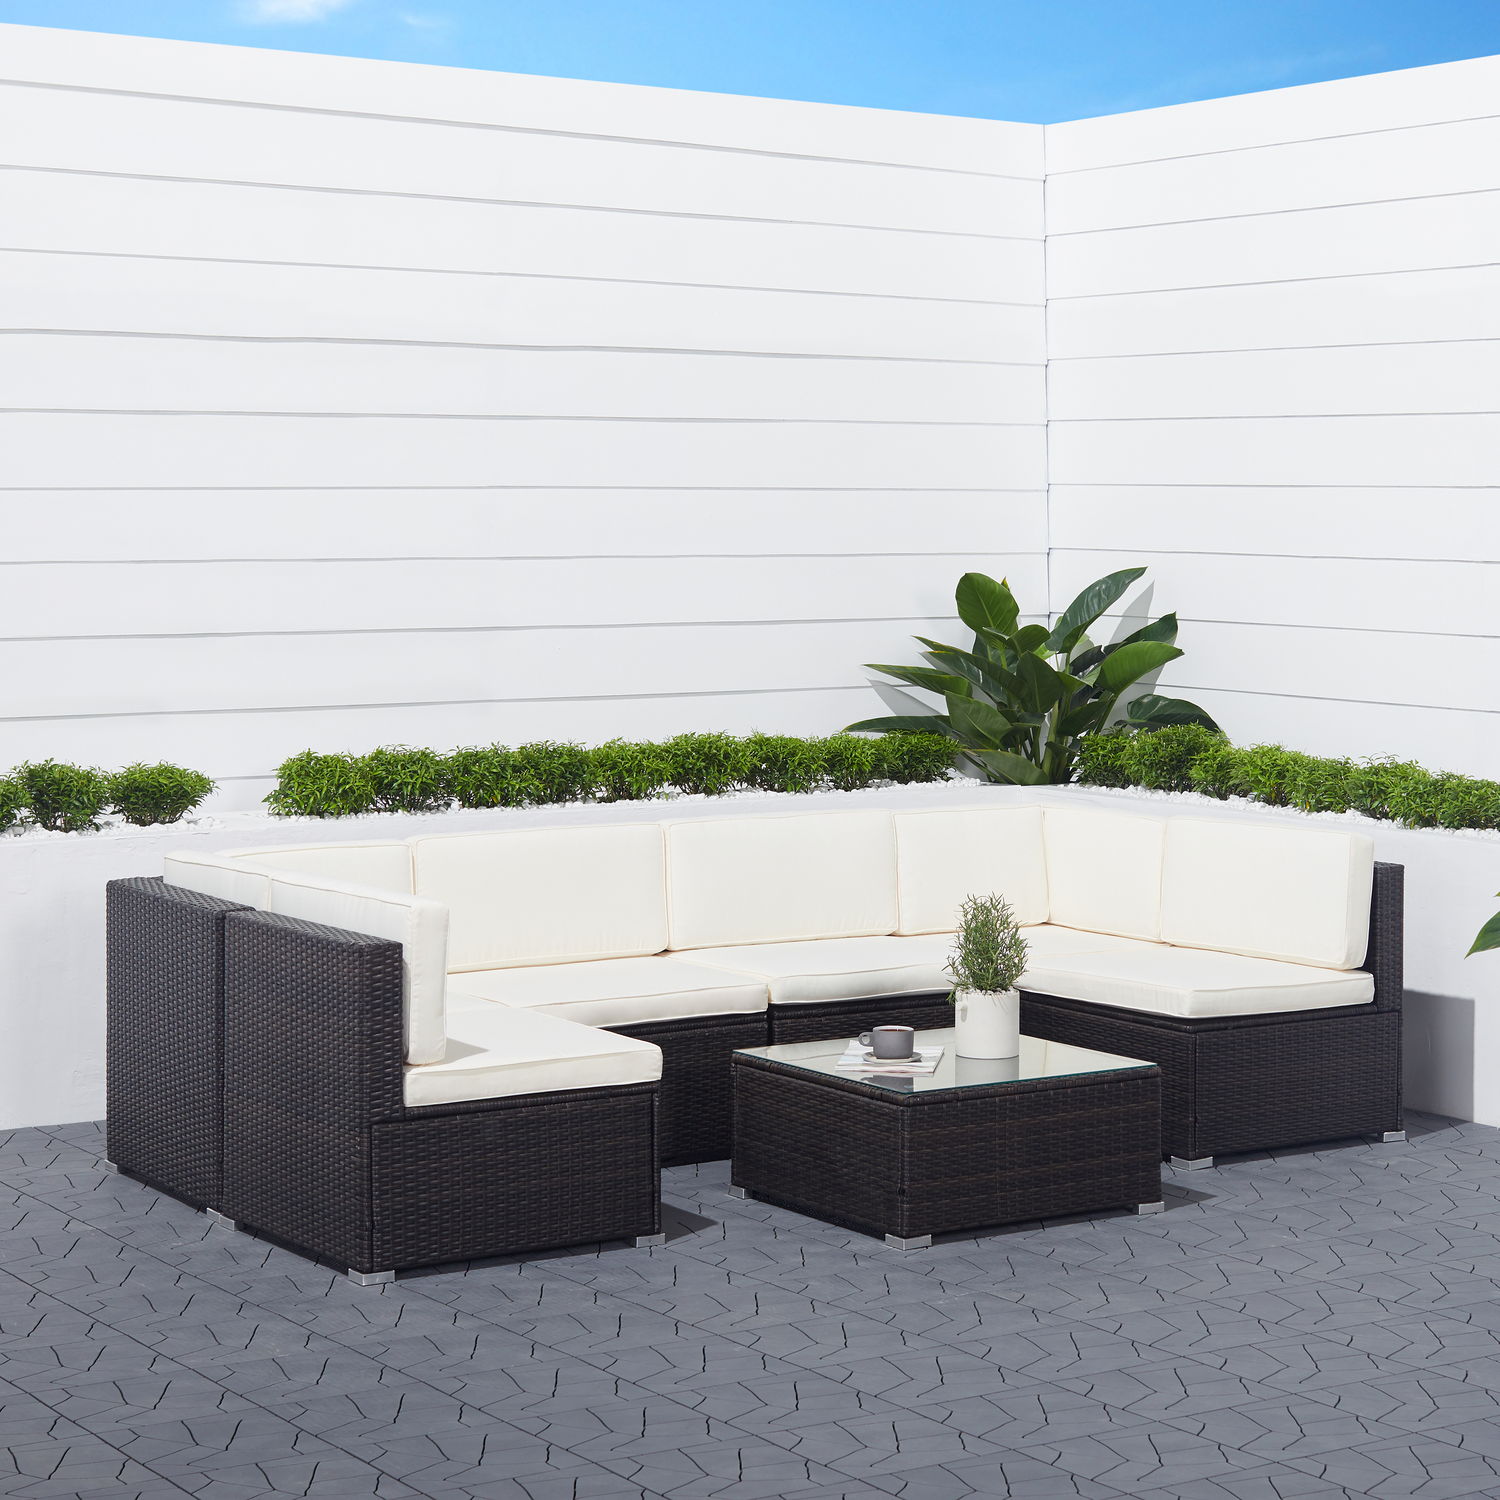 Venice 6-piece Classic Outdoor Wicker Sectional Sofa in Black with Seat and Back Cushion